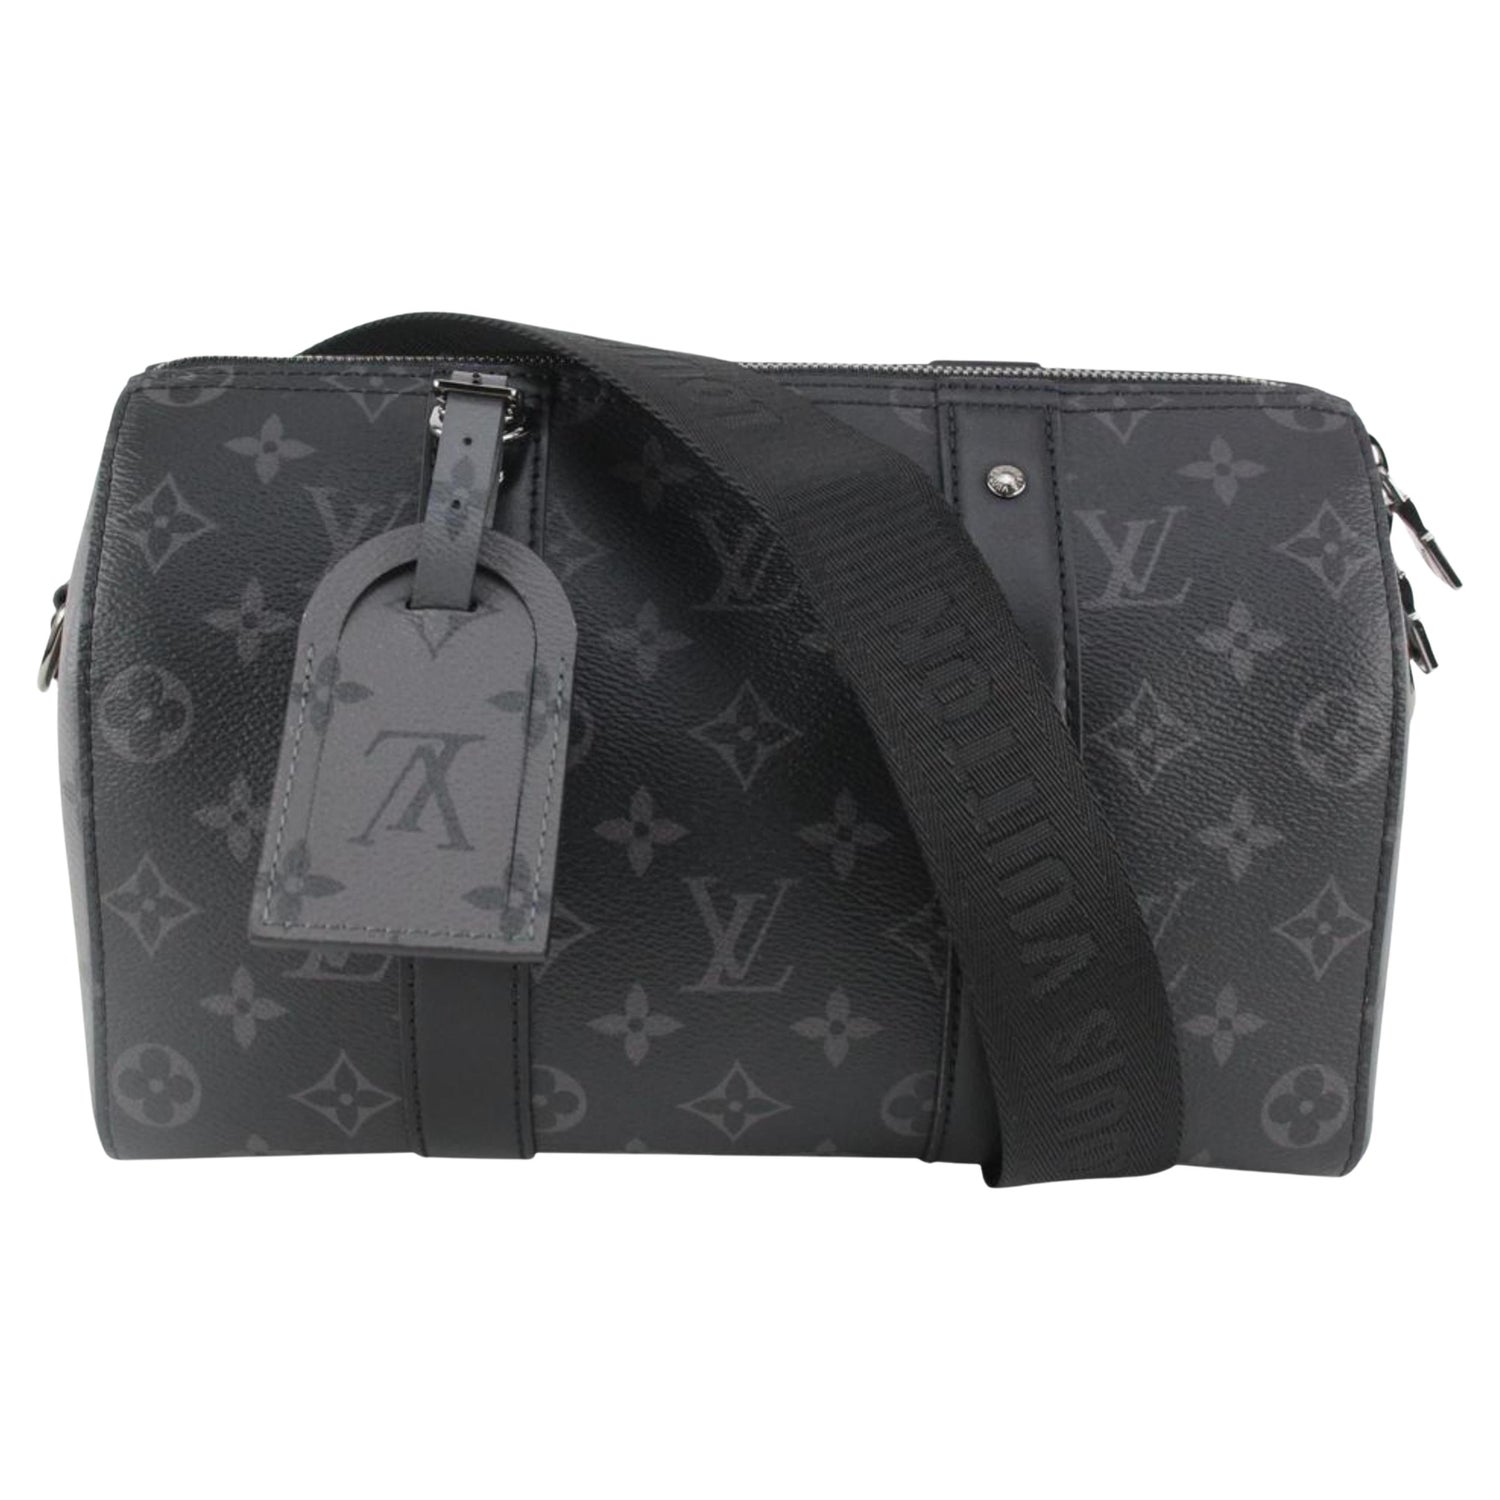 Louis Vuitton 2009 pre-owned Limited Edition Speedy 38 Eclipse Bag